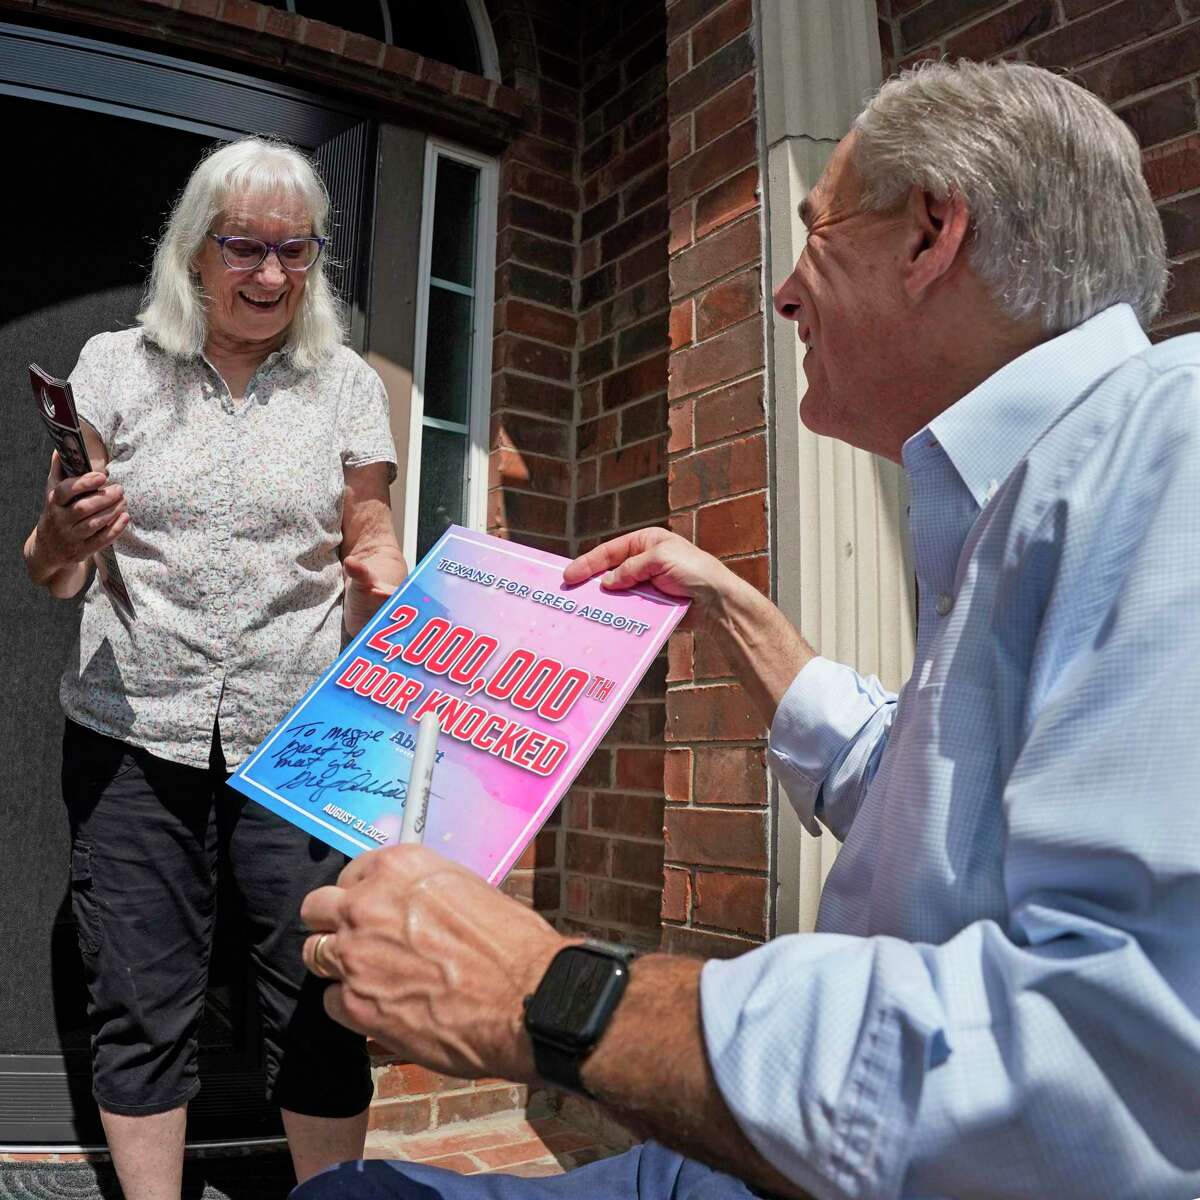 Texas Governor Greg Abbott talks with suburban Allen, Texas resident Maggie Pitka during a photo opportunity heralding the ceremonial ‘knock’ on the 2,000,000th door of the election cycle. CREDIT: Louis DeLuca for The Houston Chronicle